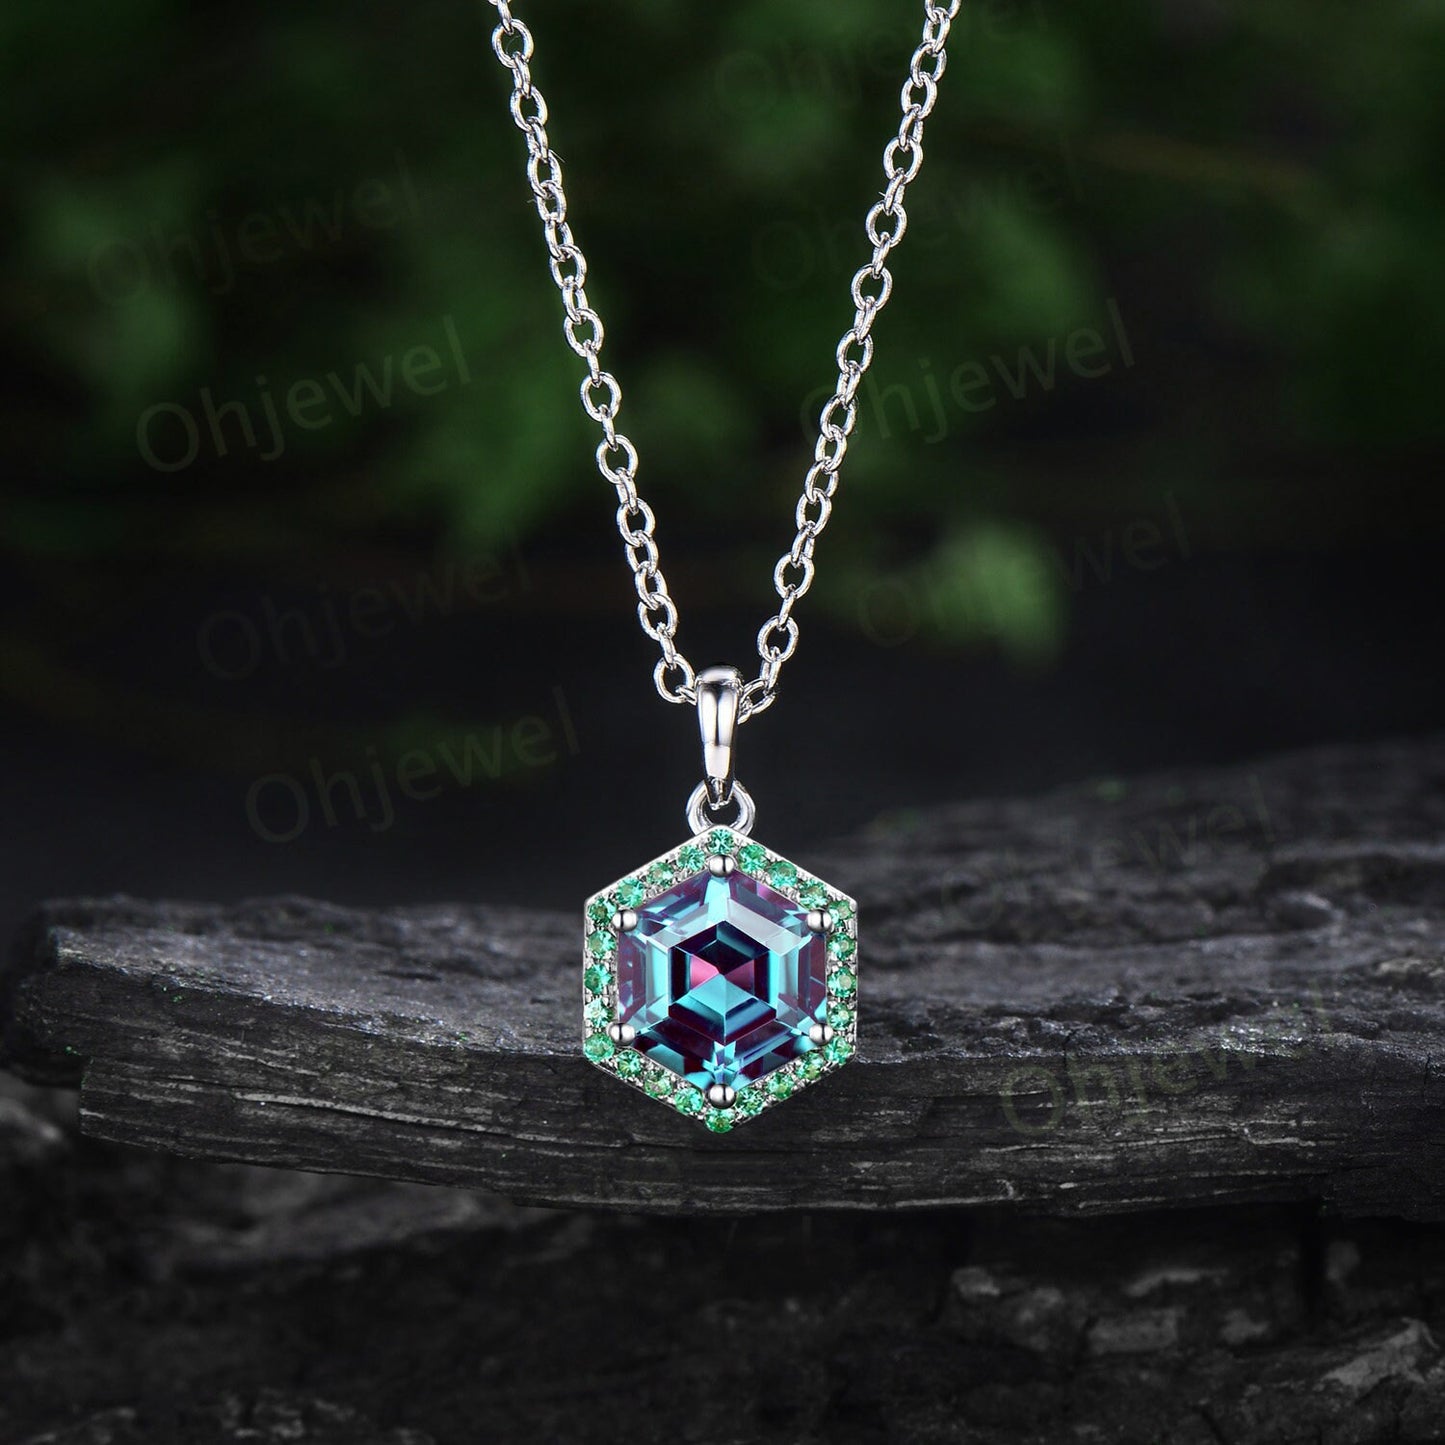 Hexagon cut Alexandrite necklace dainty halo emerald unique necklace Pendant for women June birthstone 14k rose gold jewelry gift